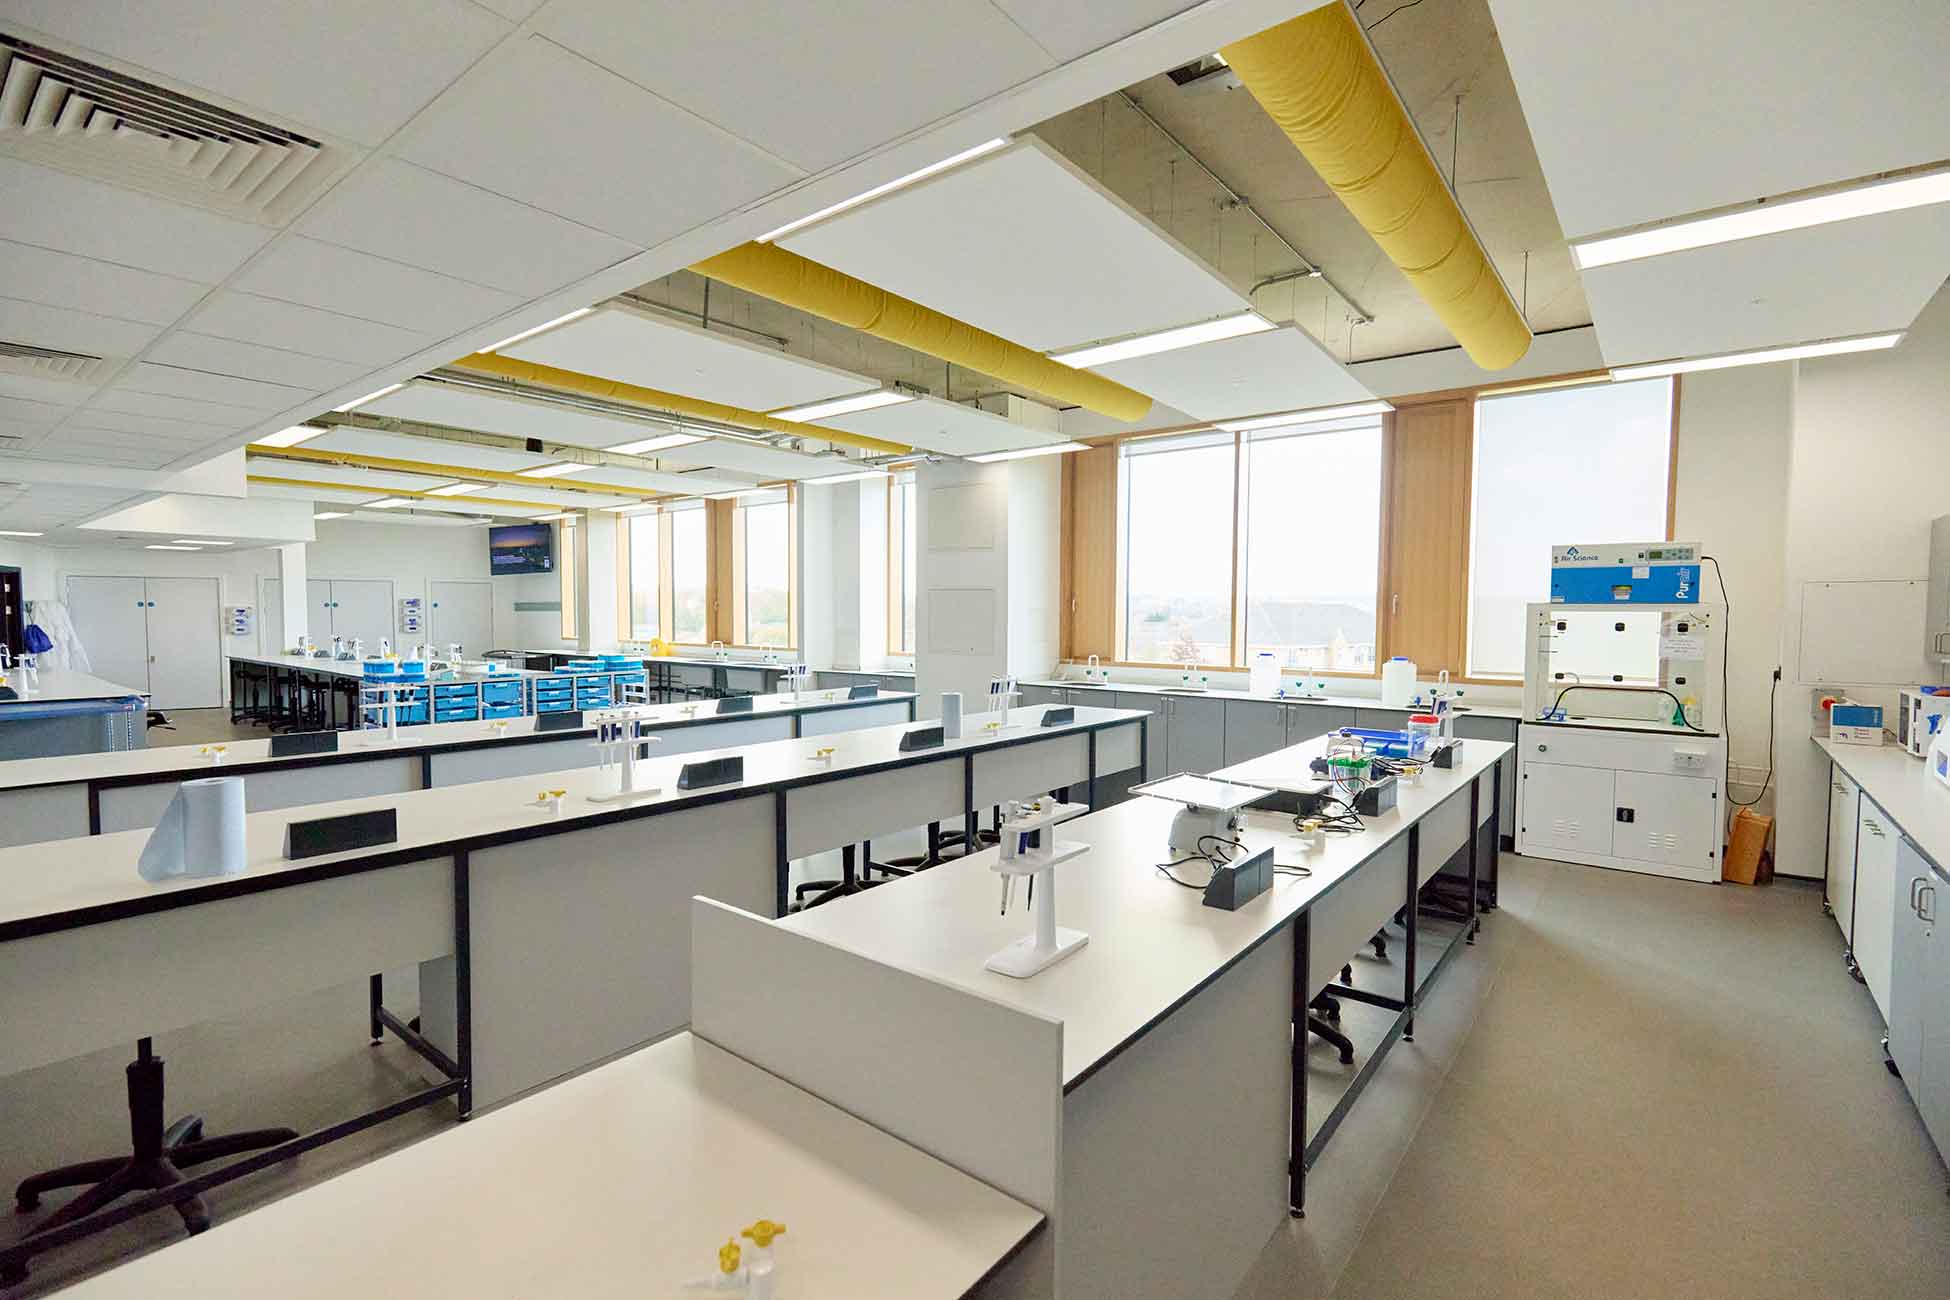 A photograph of the Bioscience Laboratories at the University of Northampton. There are three modern white workbenches with equipment laid out for experiments and floor-to-ceiling windows in the background